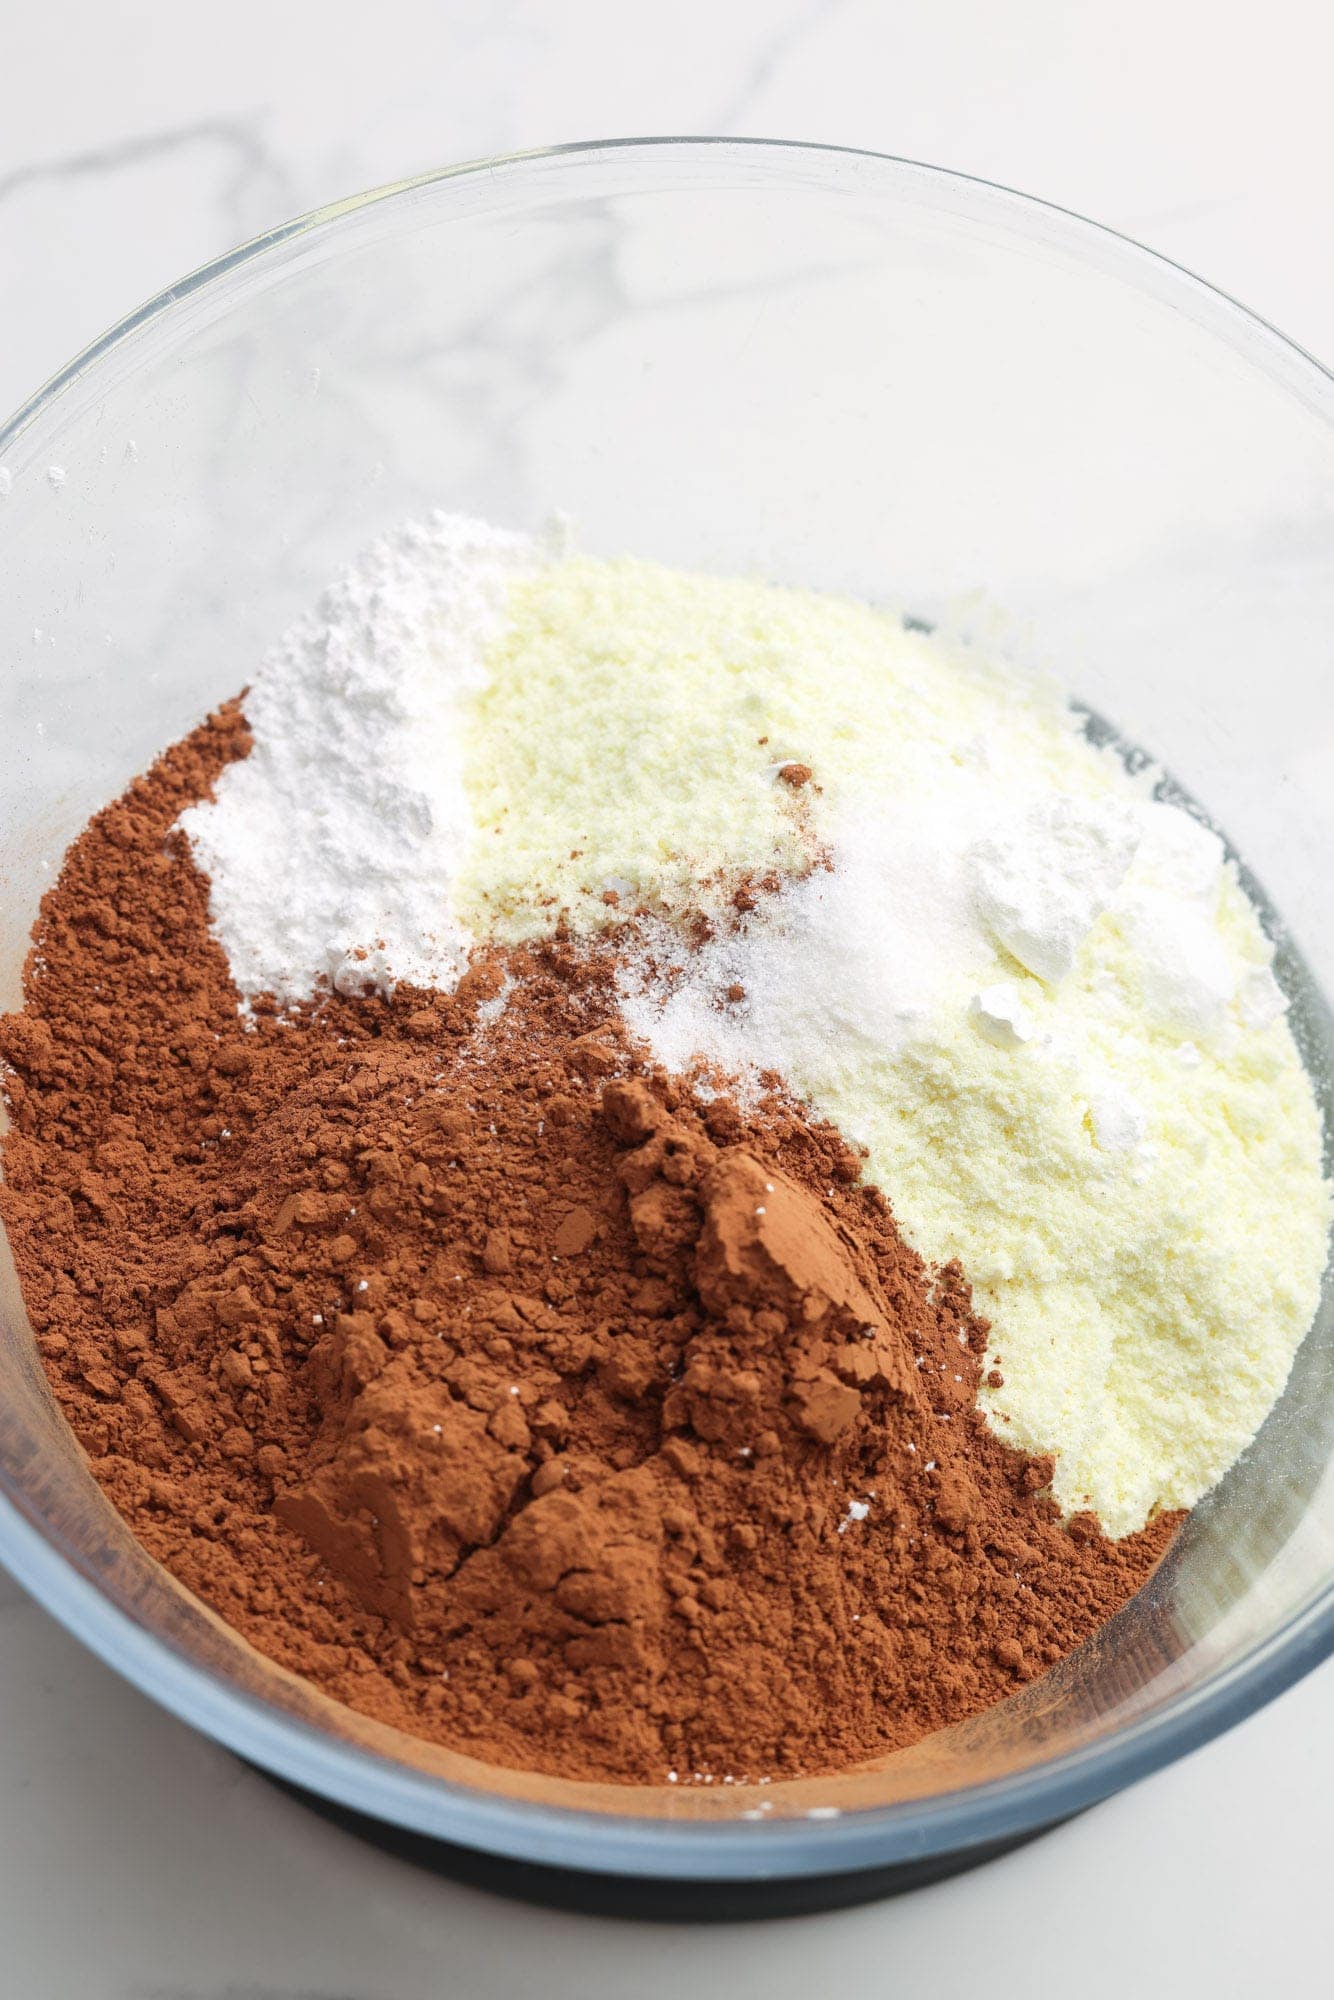 Cocoa mix ingredients in a mixing bowl.